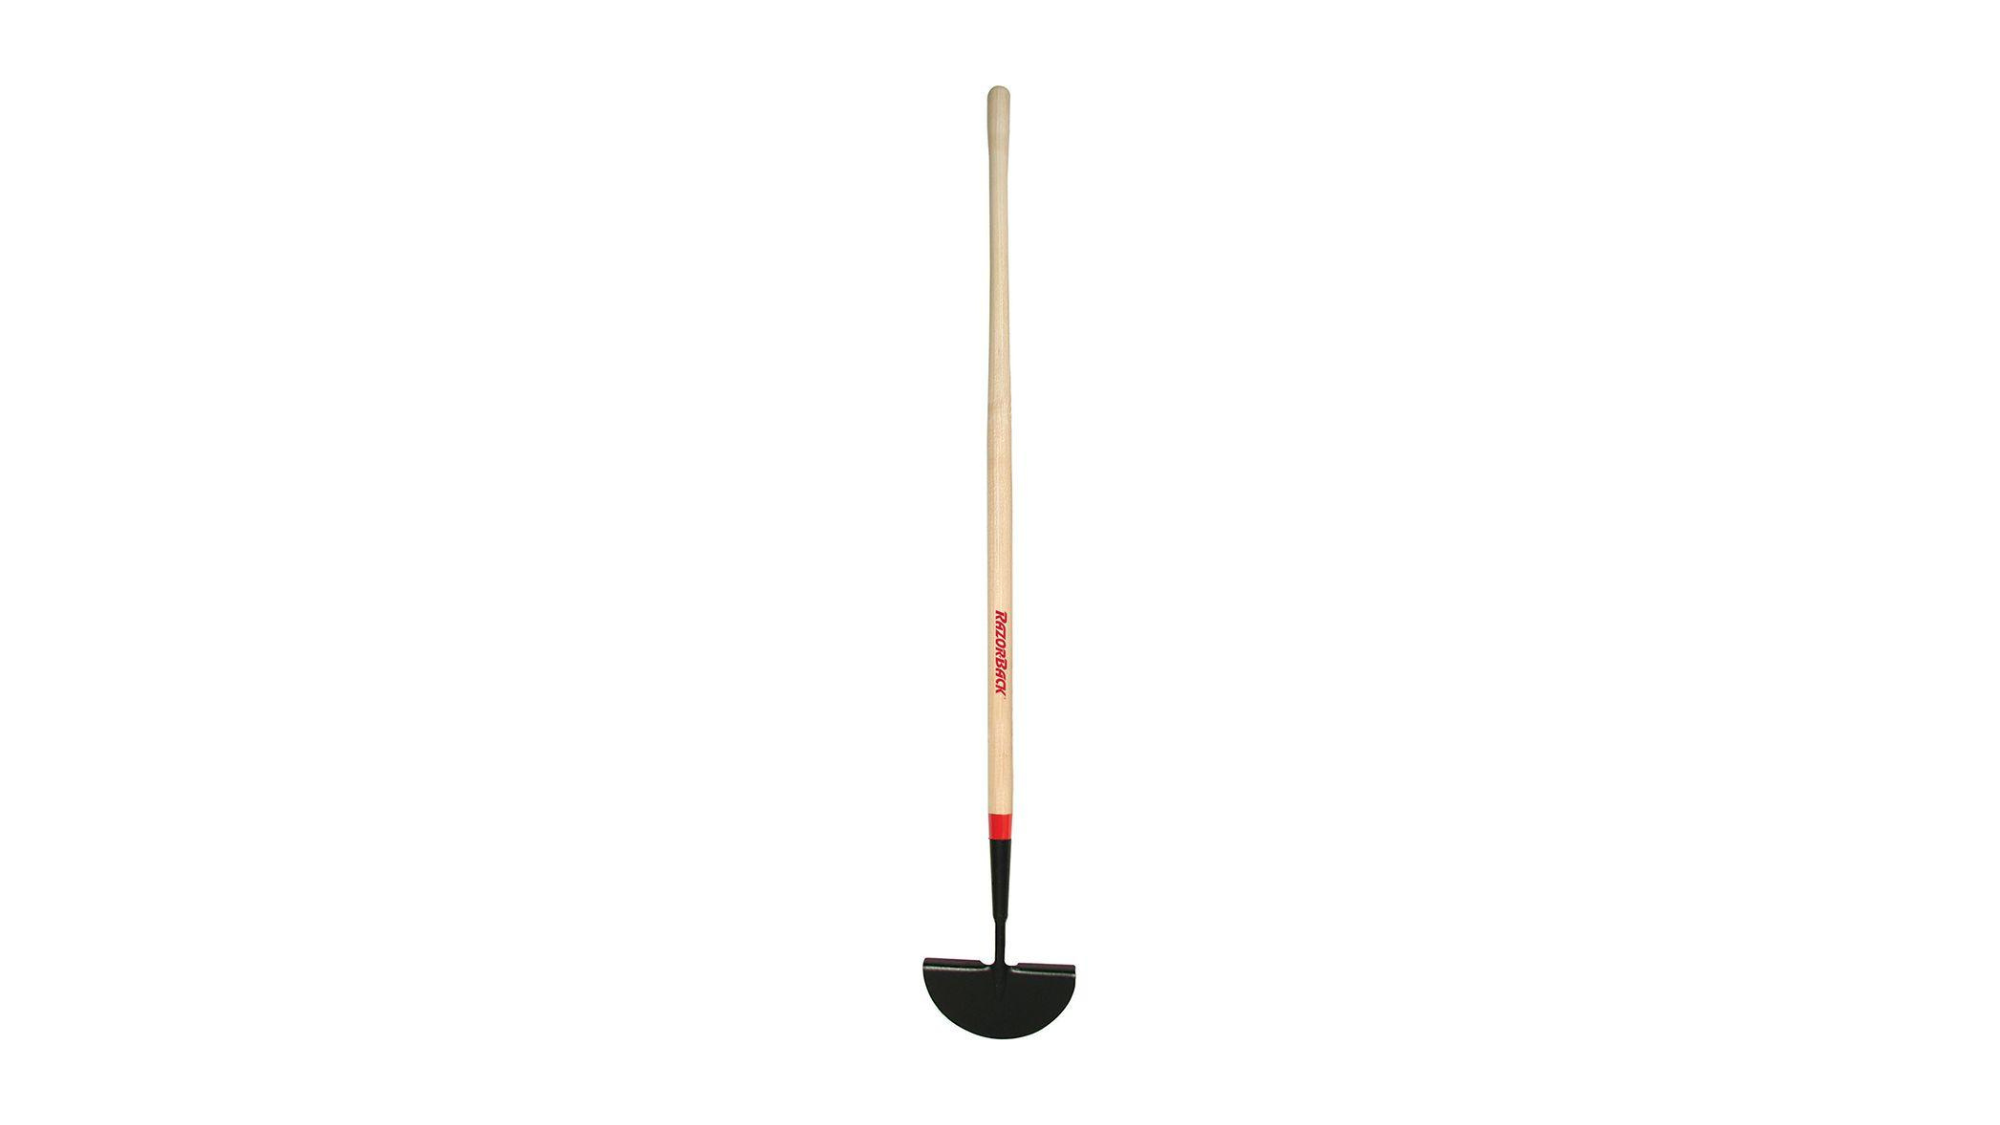 Razor-Back Wood Handle Turf Edger with straight handle and crescent blade on white background